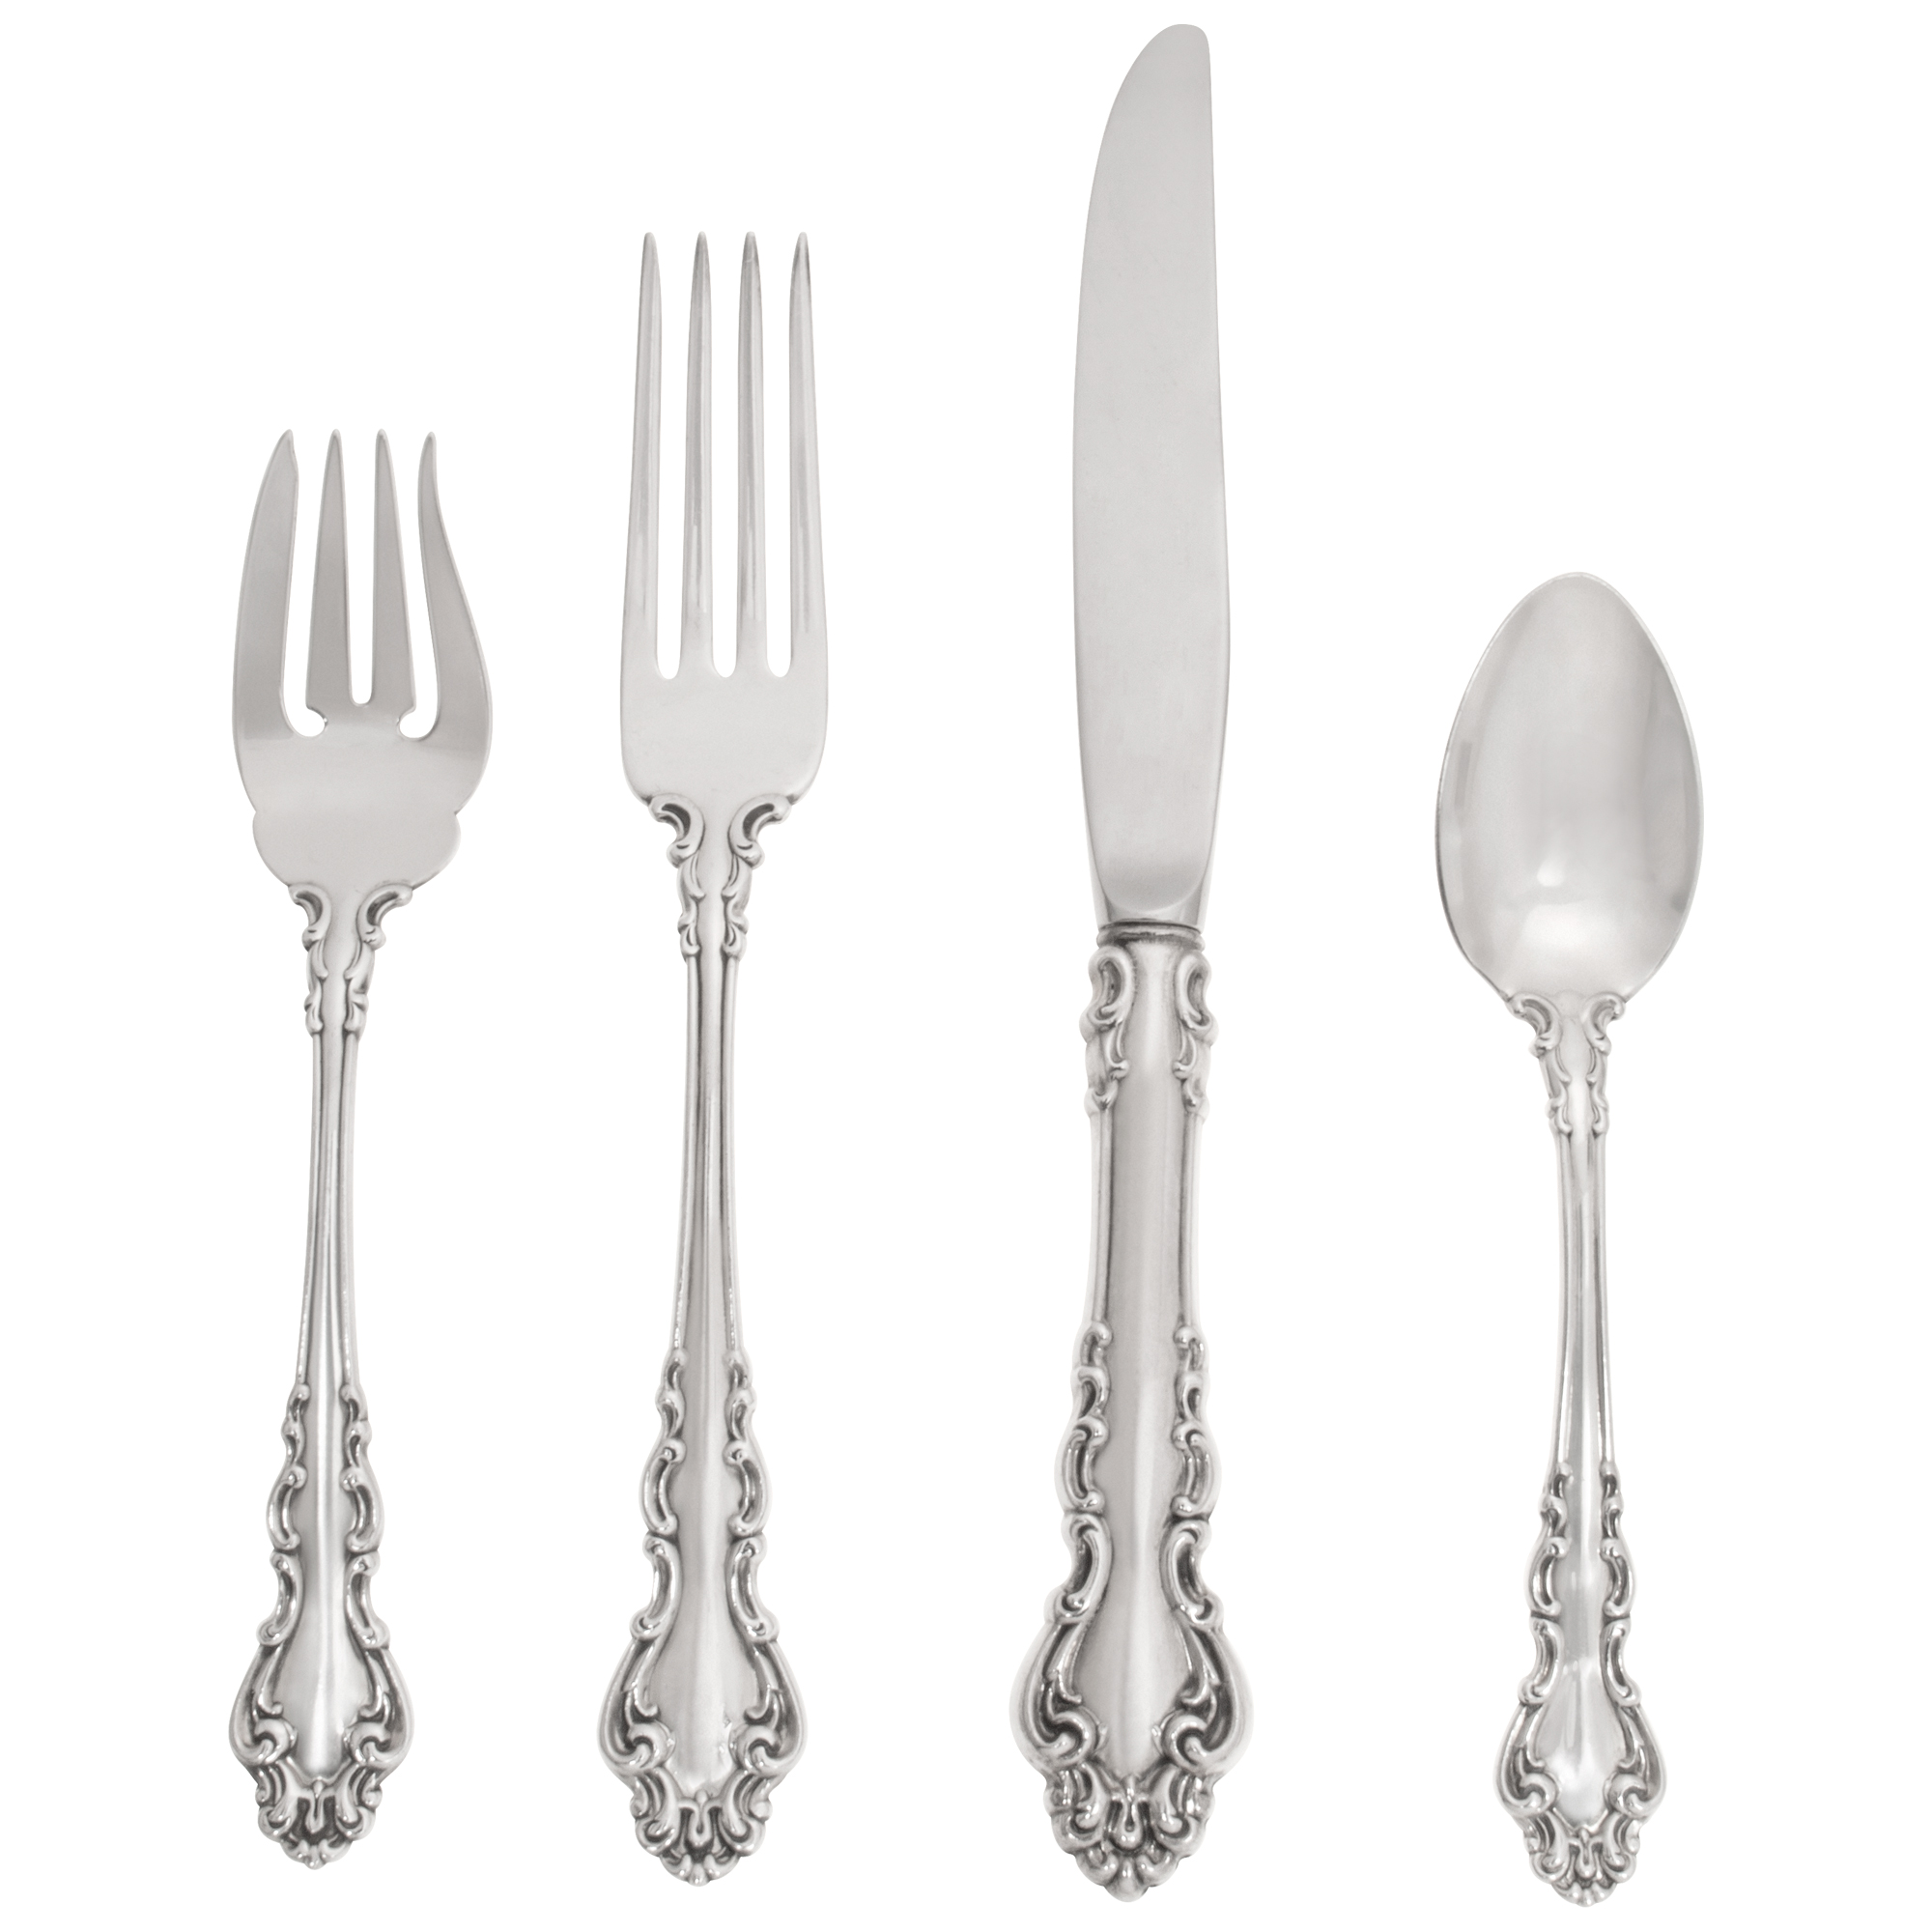 SPANISH BAROQUE, Reed and Barton, sterling silver flatware set patented in 1965- 4 place set for 12 (double tea spoons and 8 serving pieces, TOTAL 68  PIECES.